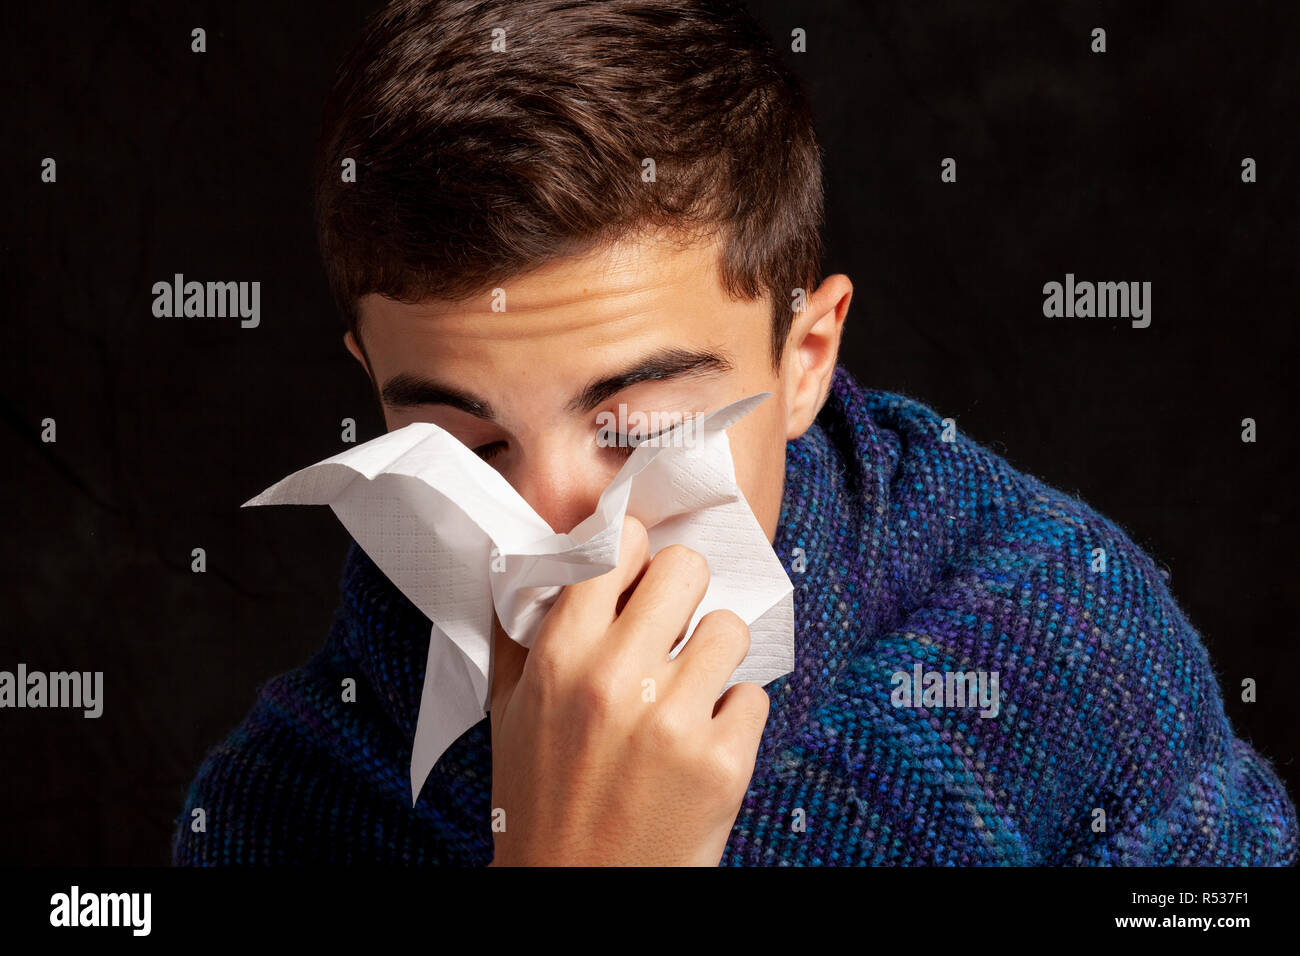 young boy who blows his nose Stock Photo